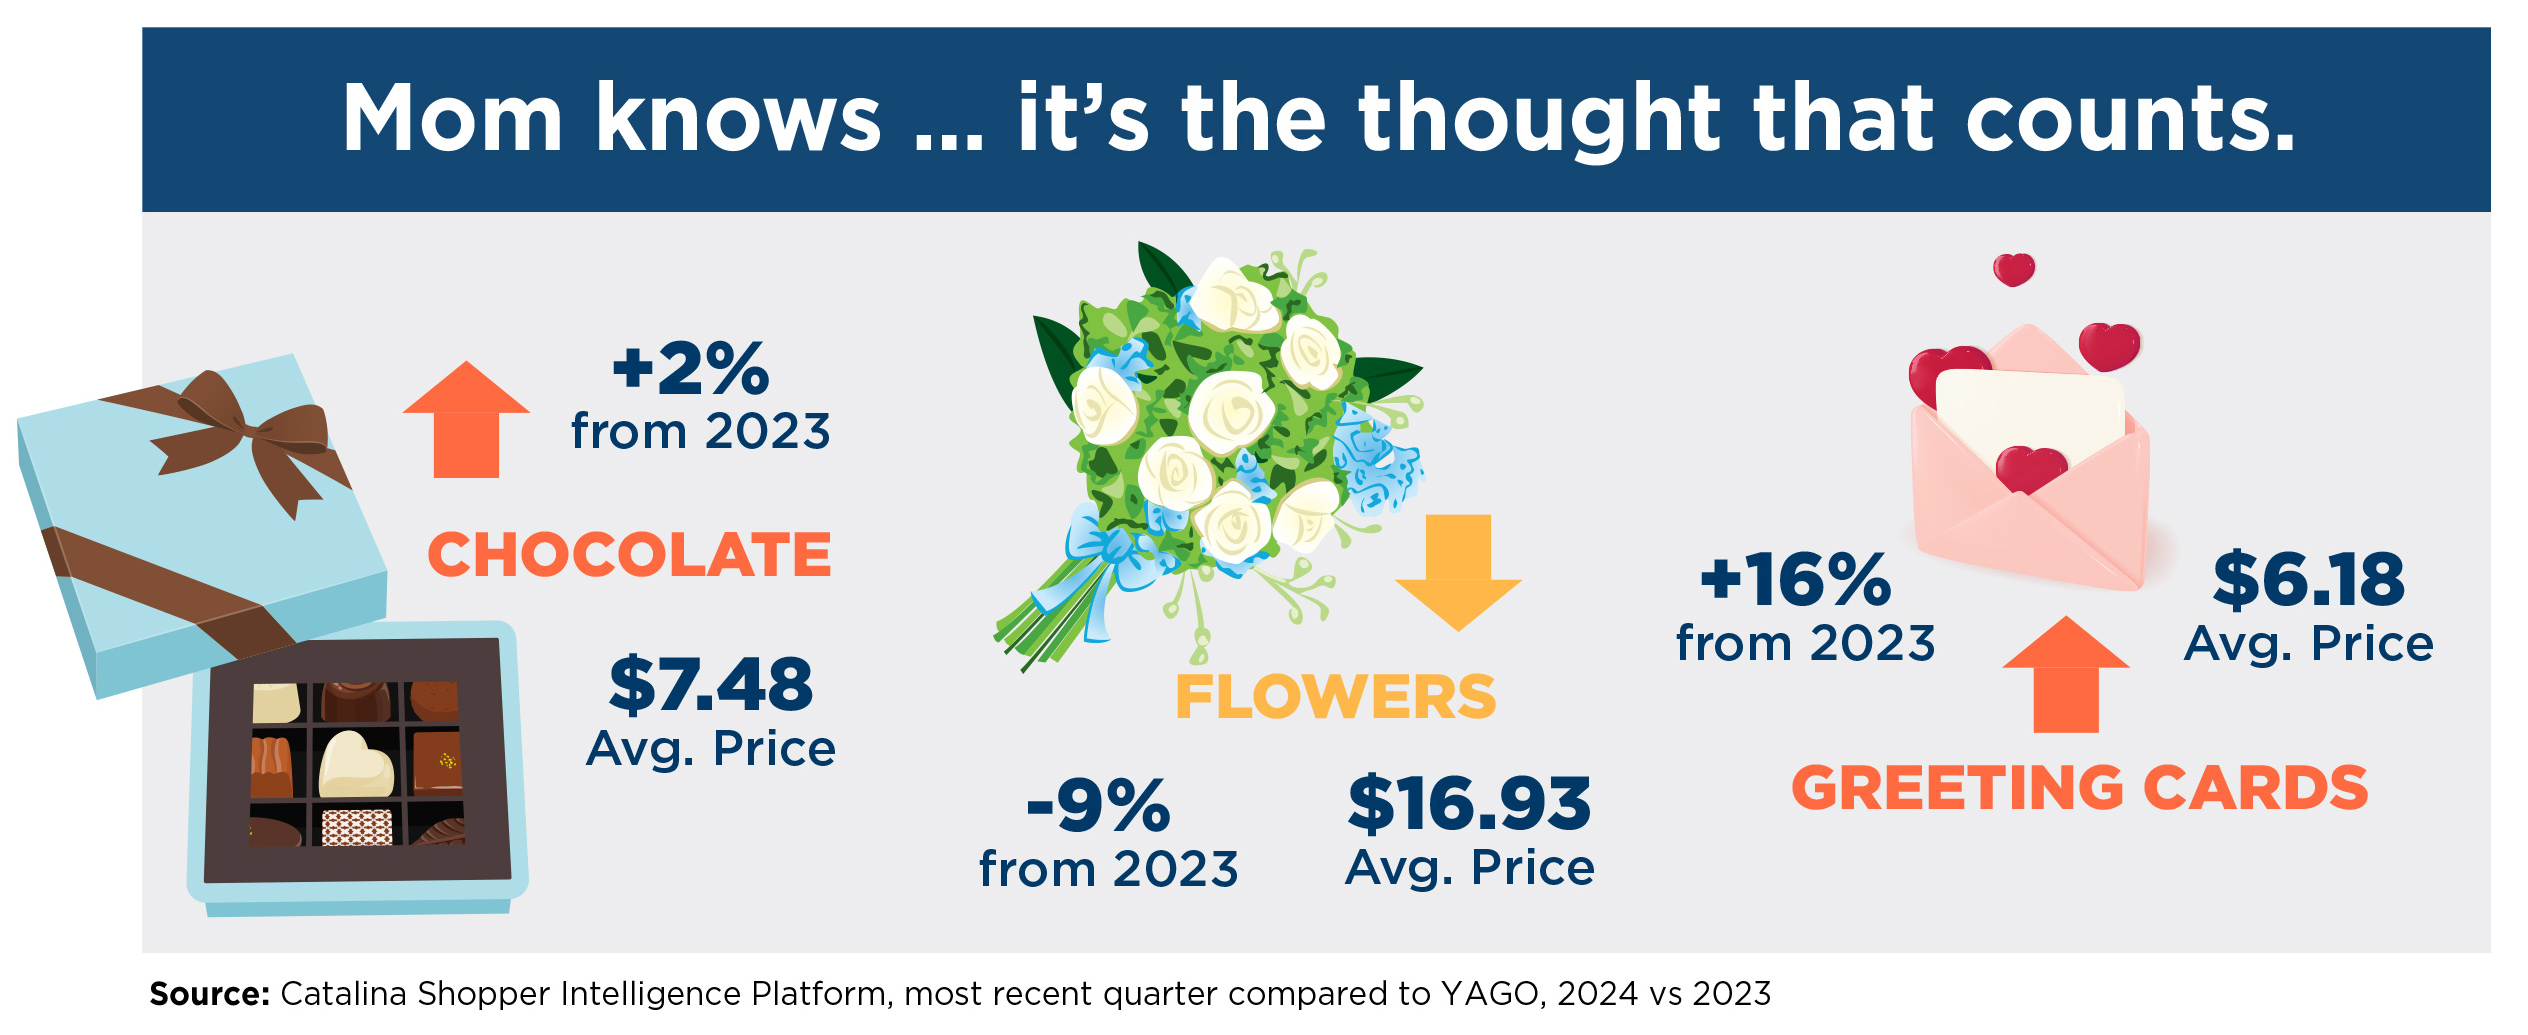 Average prices for Mother’s Day gift items including a box of chocolates, flower bouquet and greeting card.